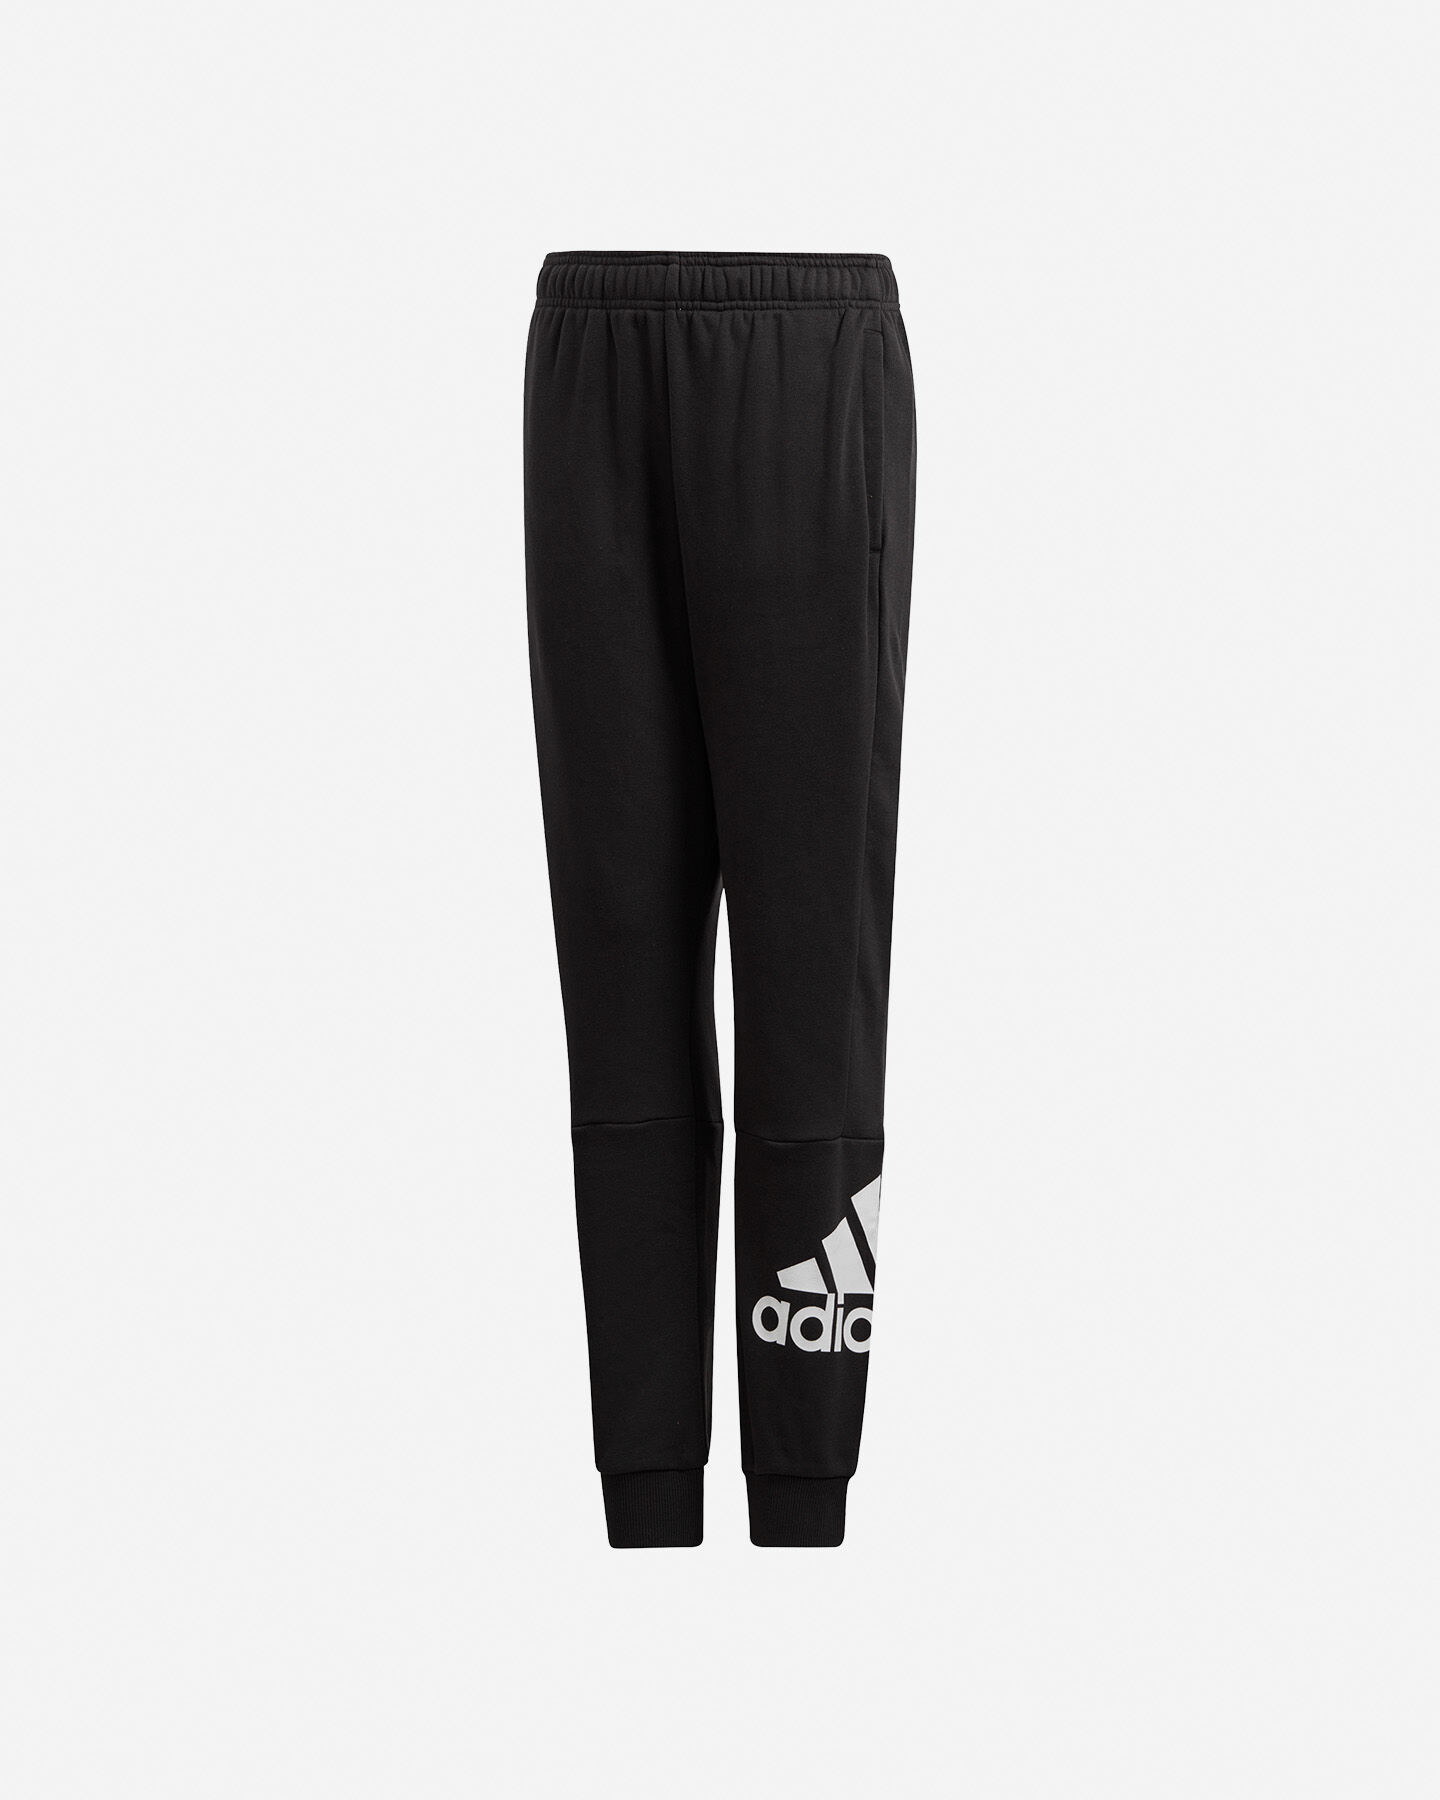  Pantalone ADIDAS MUST HAVES JR S2014745|UNI|7-8A scatto 0